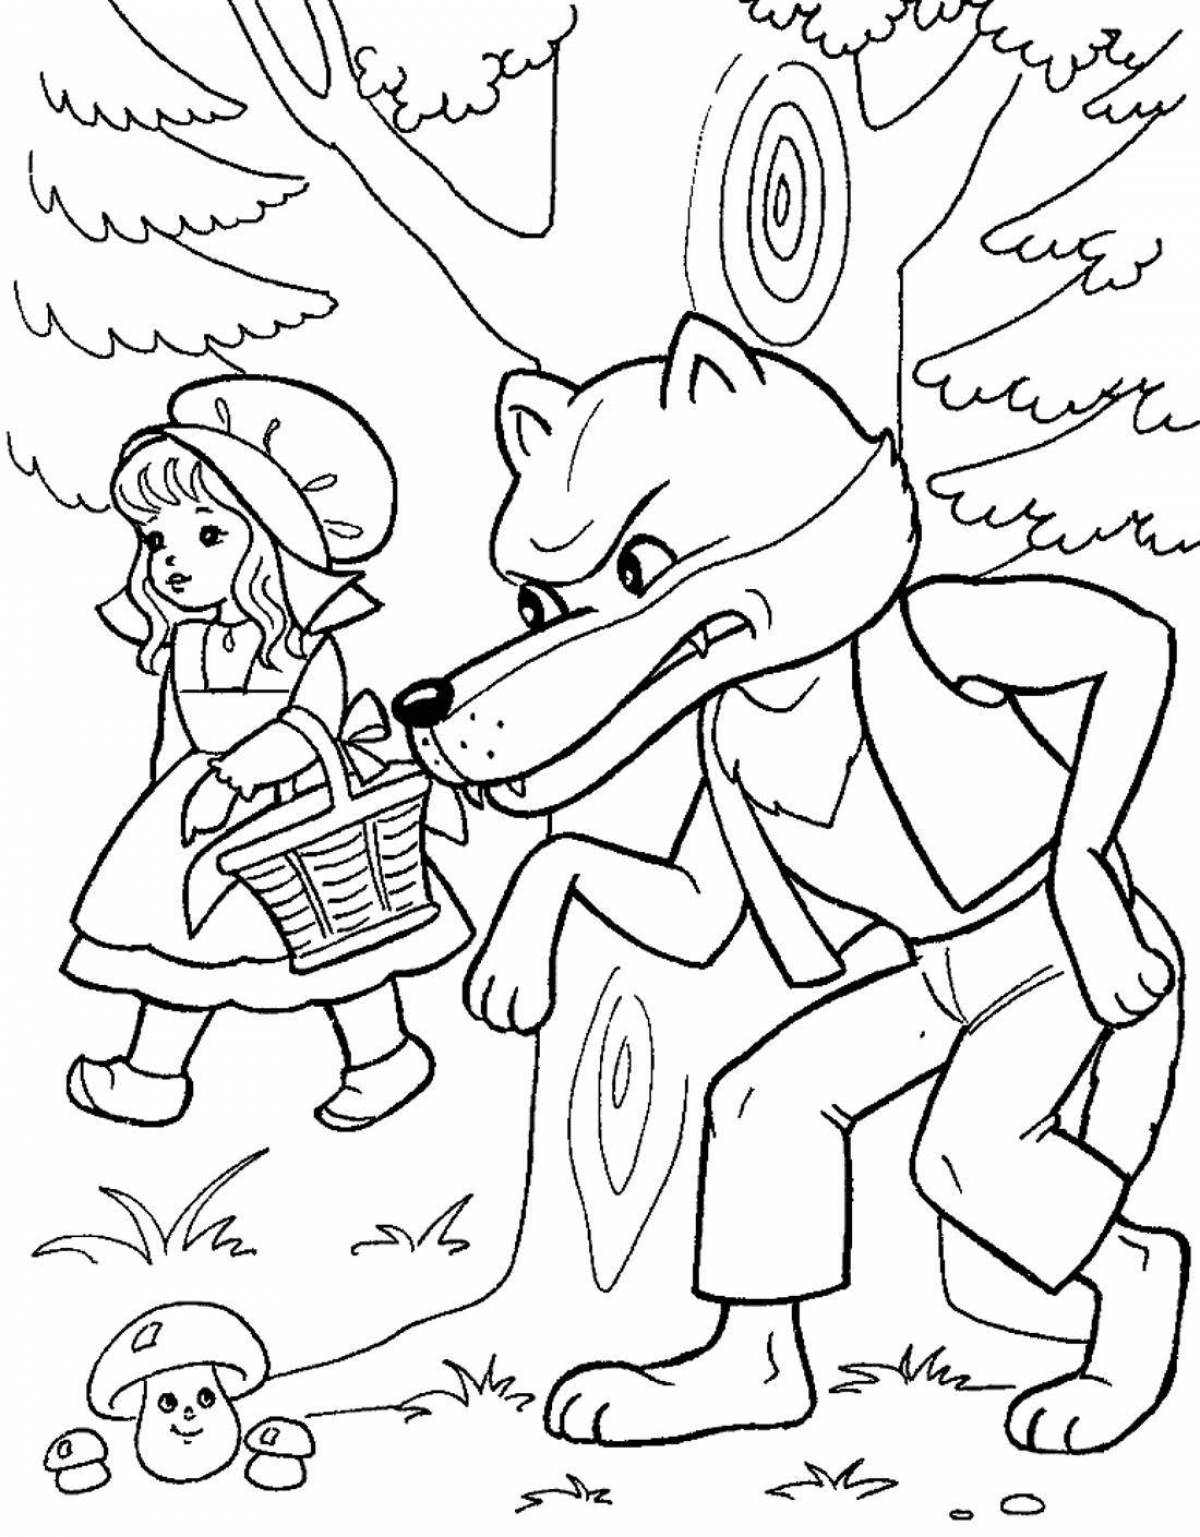 Coloring book playful wolf